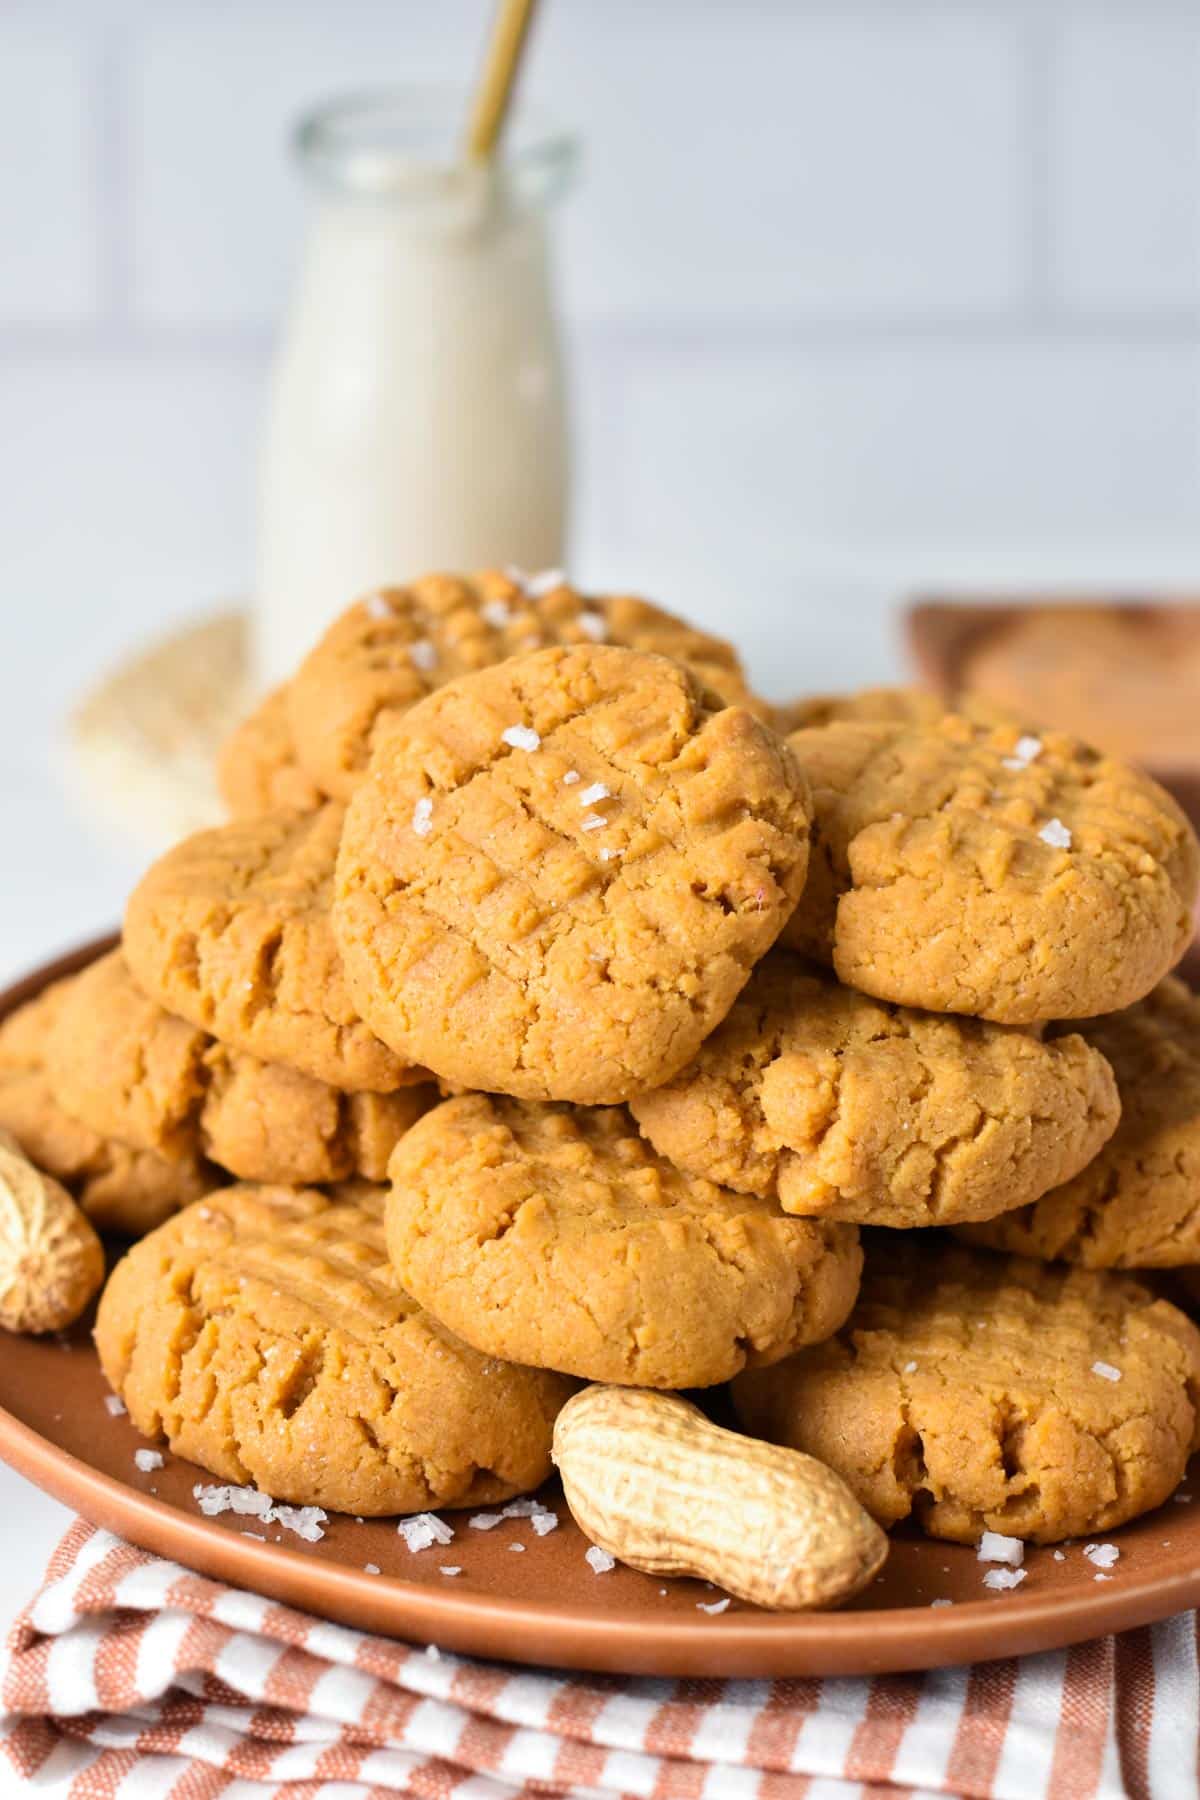 These 4 ingredient Peanut Butter Cookies are the easiest cookies for peanut butter lovers, ultra crunchy and ready in 20 minutes.Plus, these are flourless, gluten-free and dairy-free and the best allergy-friendly peanut butter cookies to share